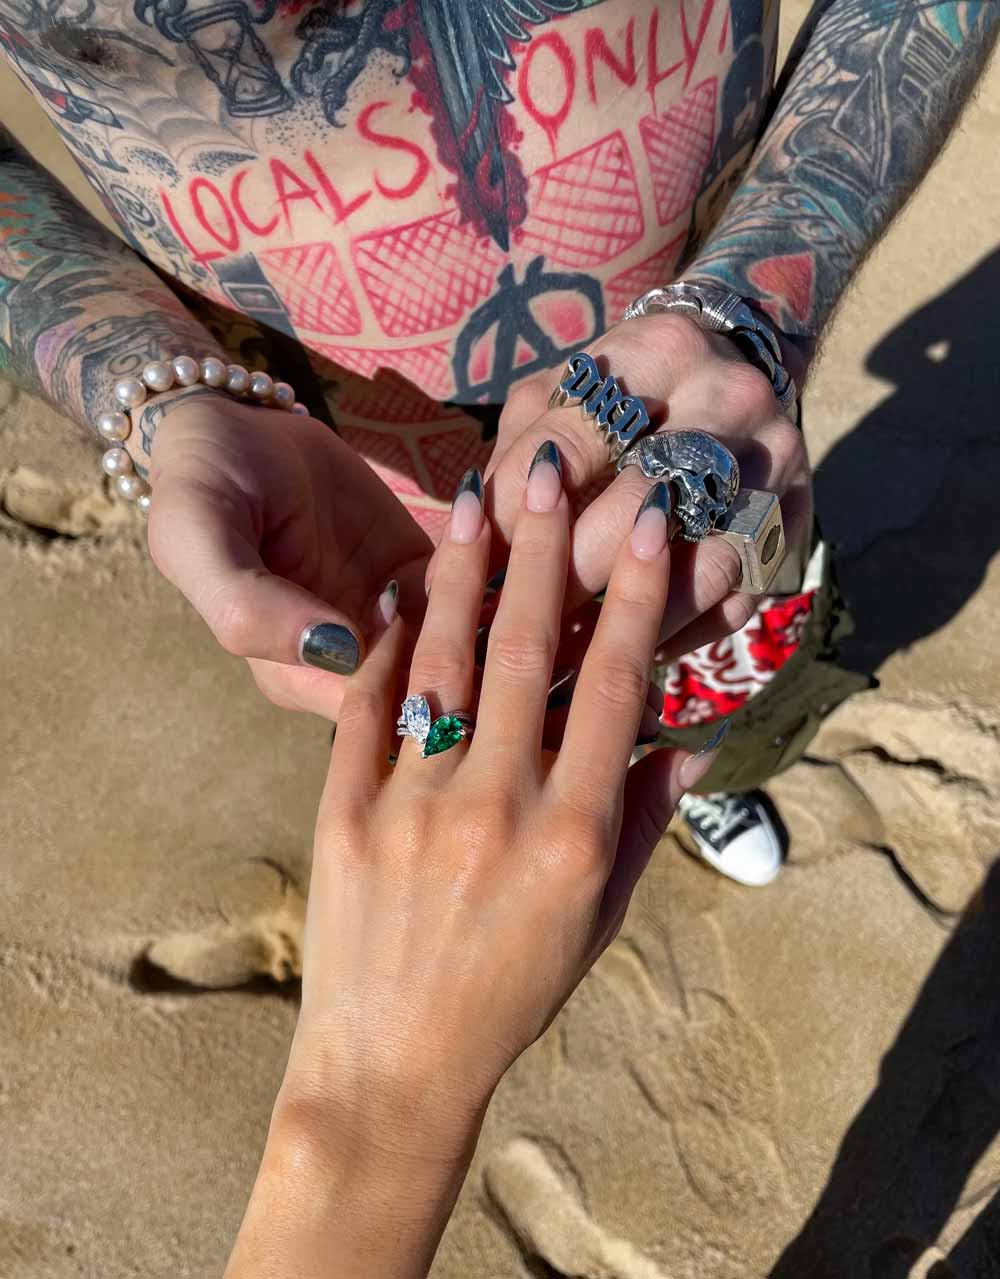 Photograph of Megan Fox's engagement ring taken by Megan from above as she holds her hand out into Machine Gun Kelly's hands.